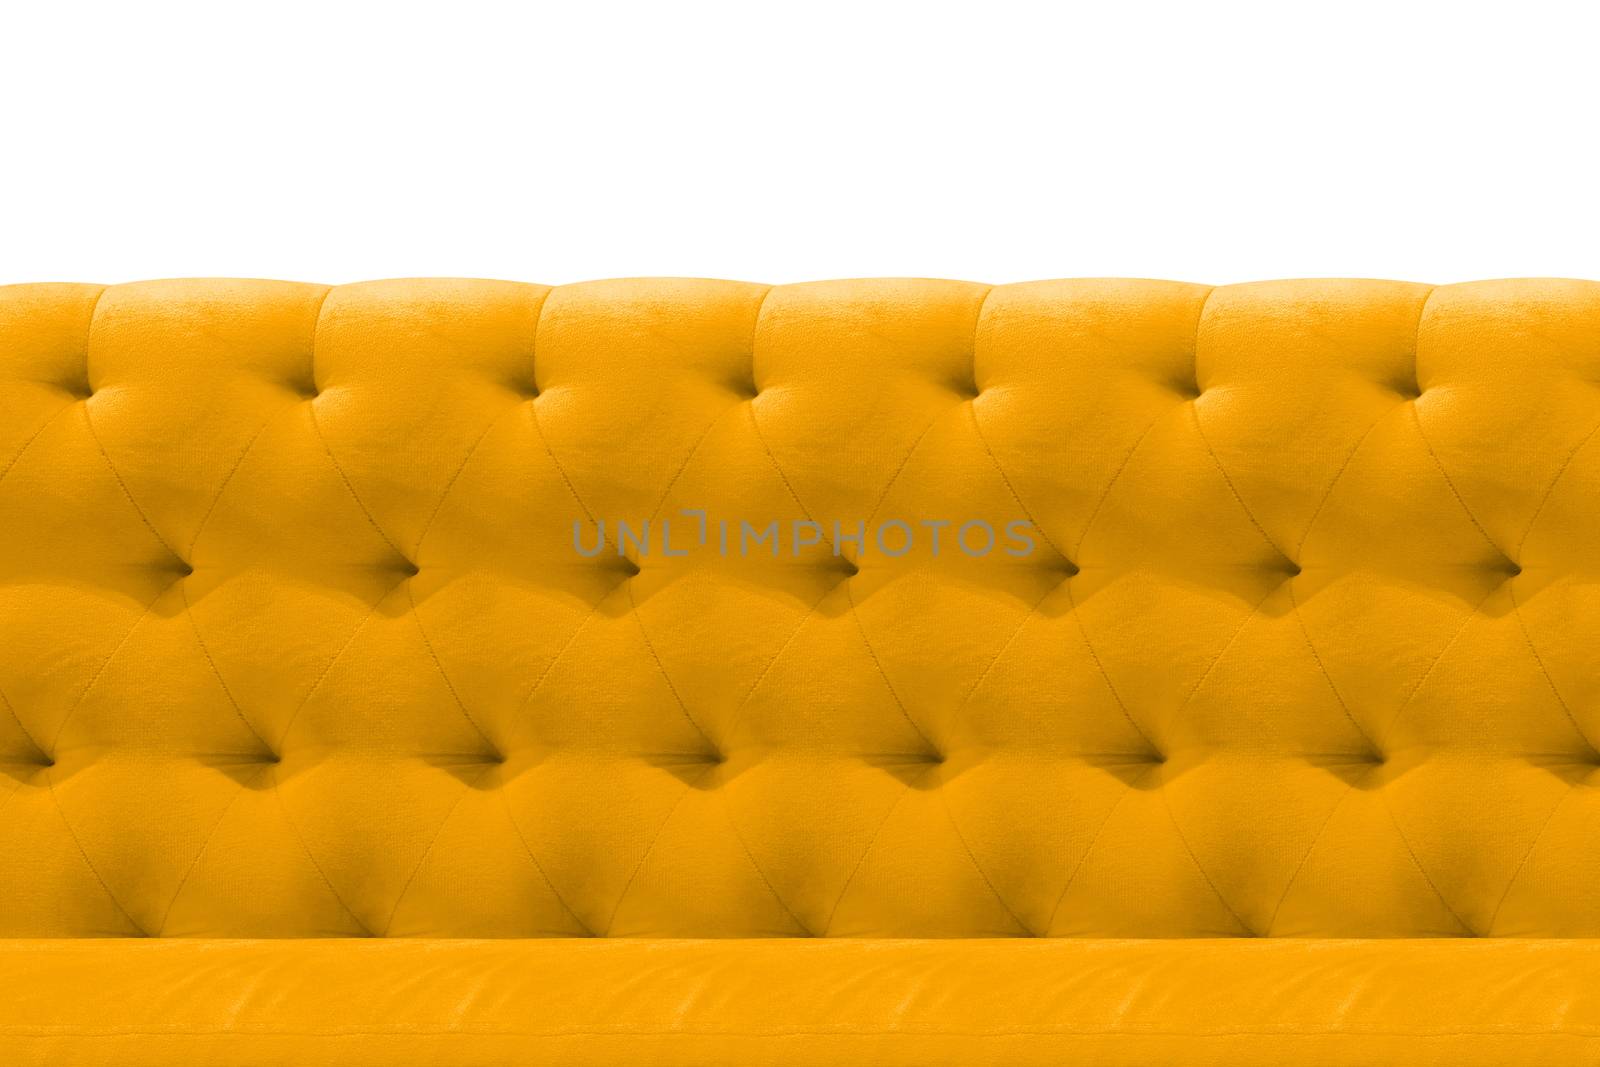 Luxury Yellow or Gold sofa velvet cushion close-up pattern background on white by cgdeaw